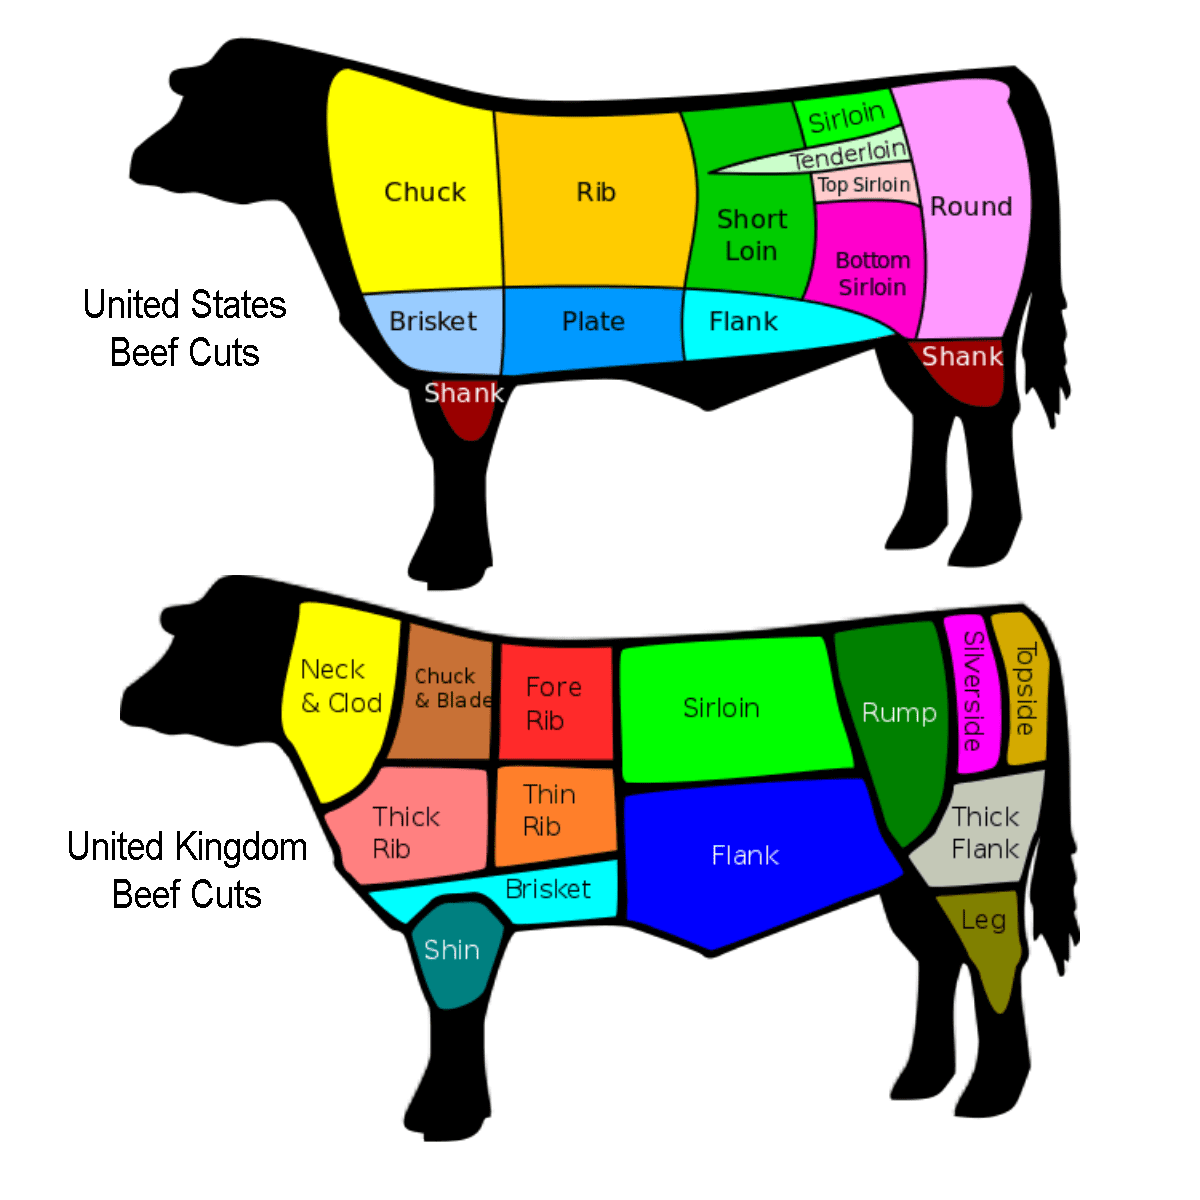 Difference in cuts of beef between United States and United Kingdom